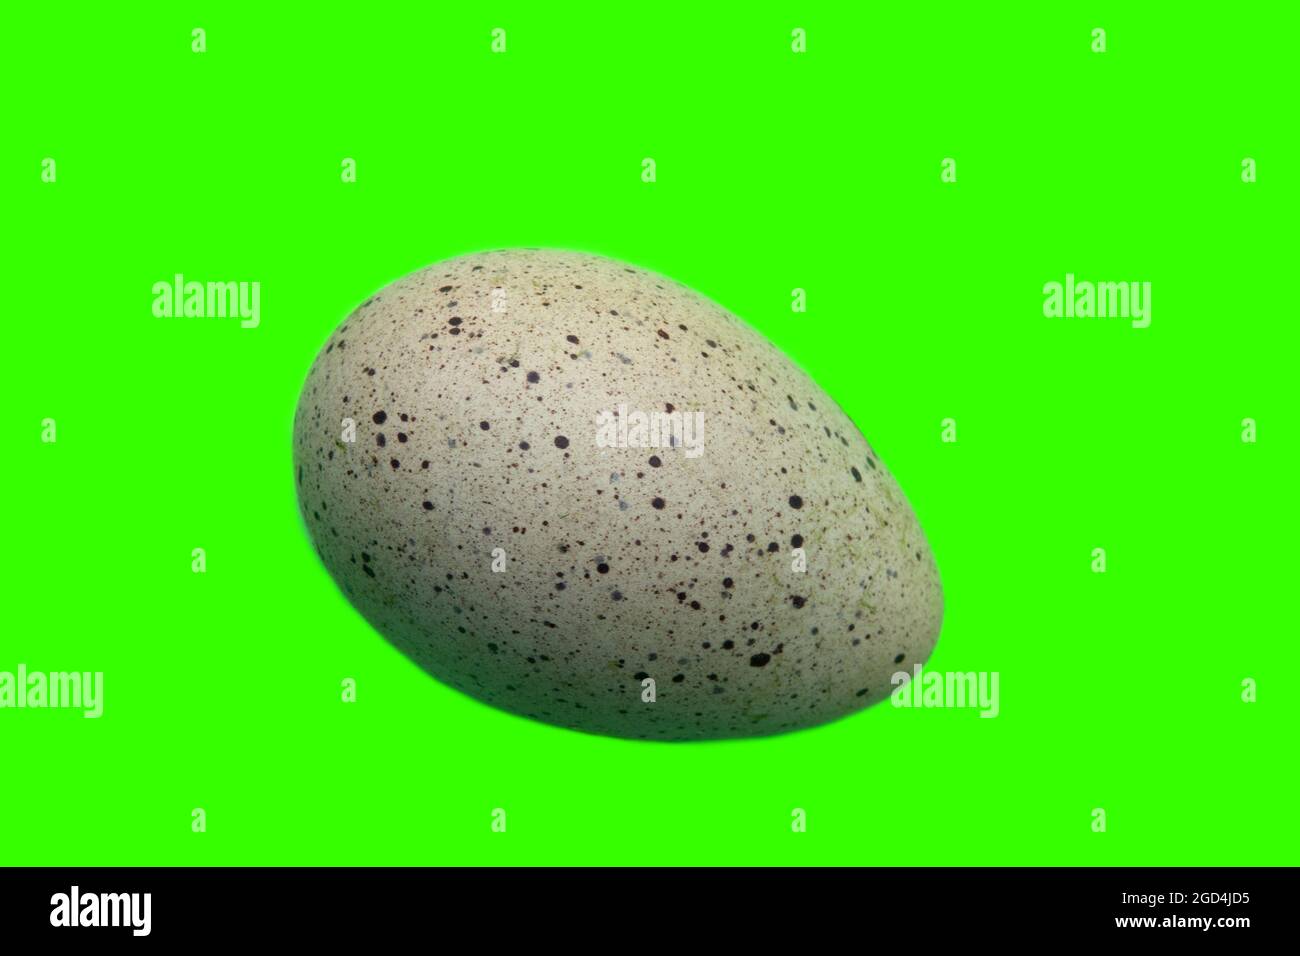 Bird's Nest Guide. Nidology. European coot (Fulica atra) egg on a yellow-green background as ornithology learning material Stock Photo